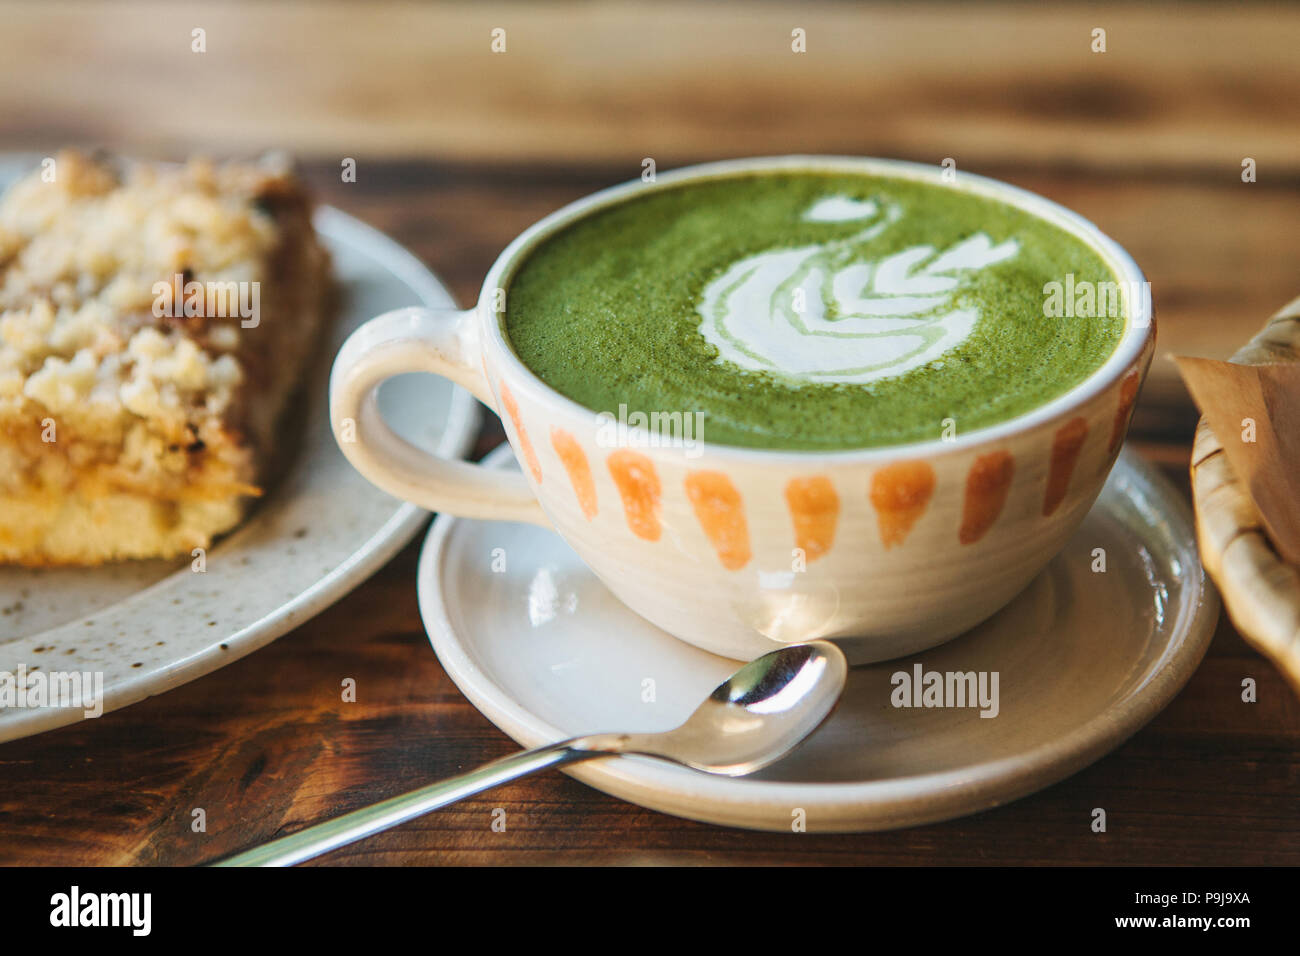 Close-up - A cup of green tea called Matcha tea or green coffee with a pattern. Stock Photo